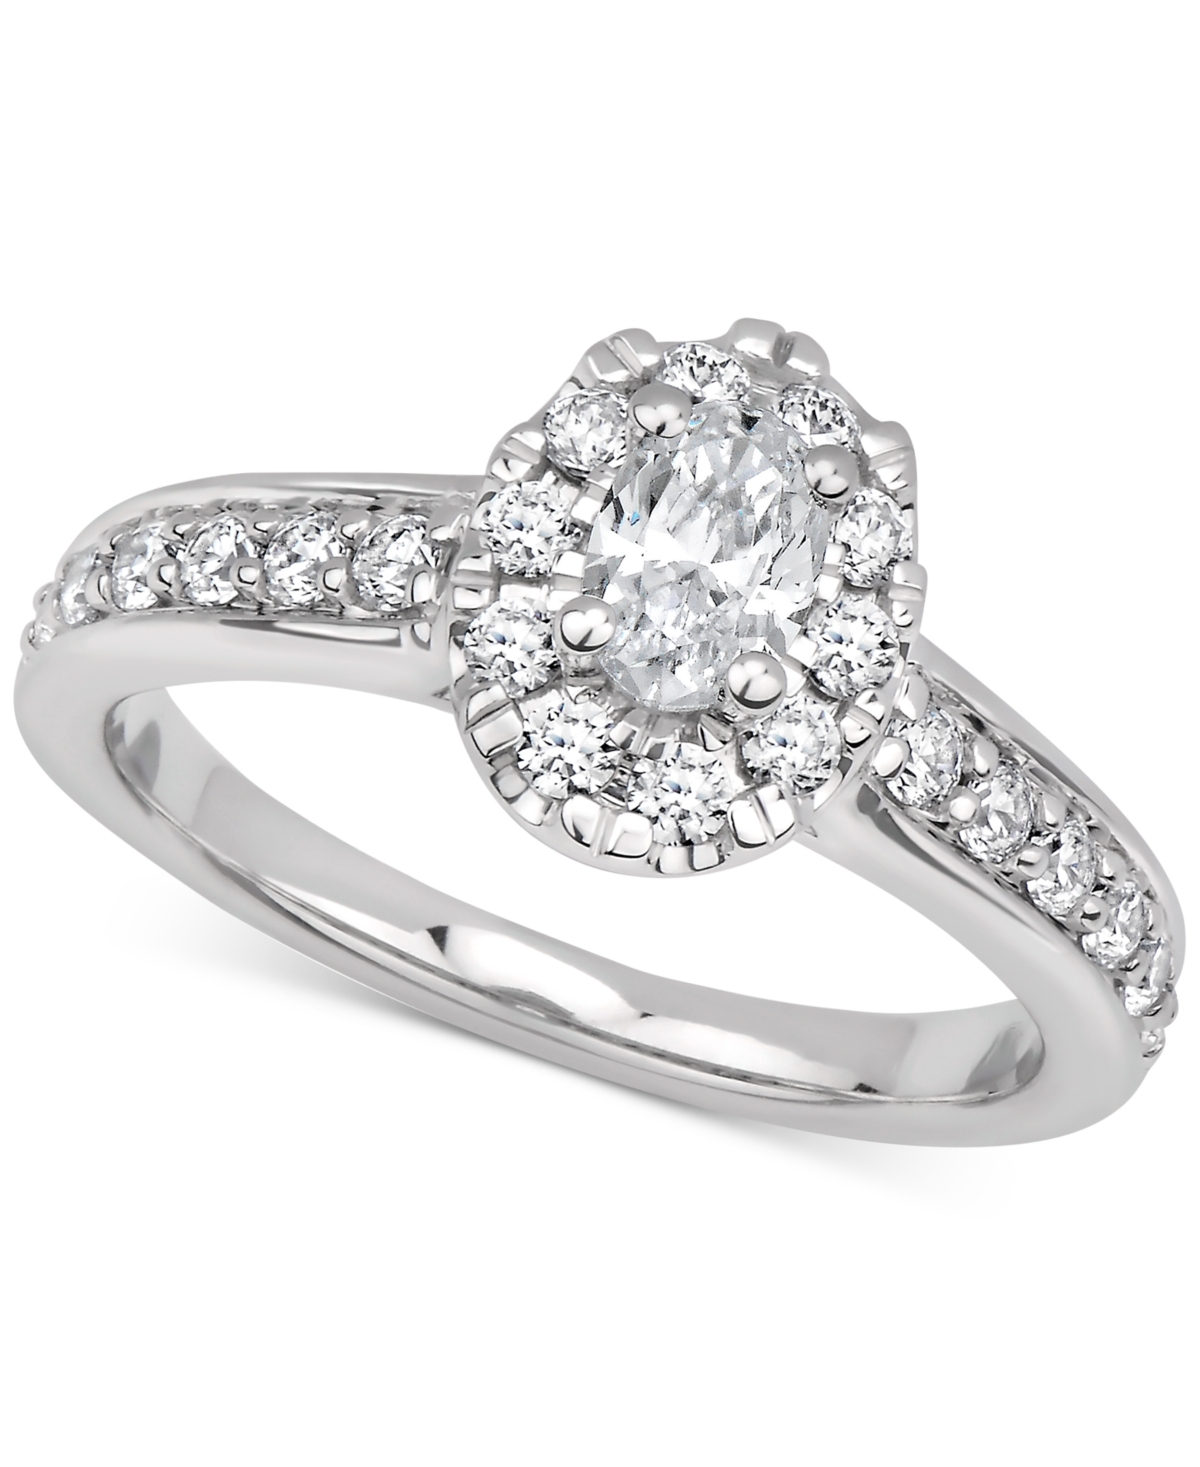 Gia Certified Diamonds Gia Certified Diamond Oval Halo Engagement Ring (1 ct. t.w.) in 14k White Gold